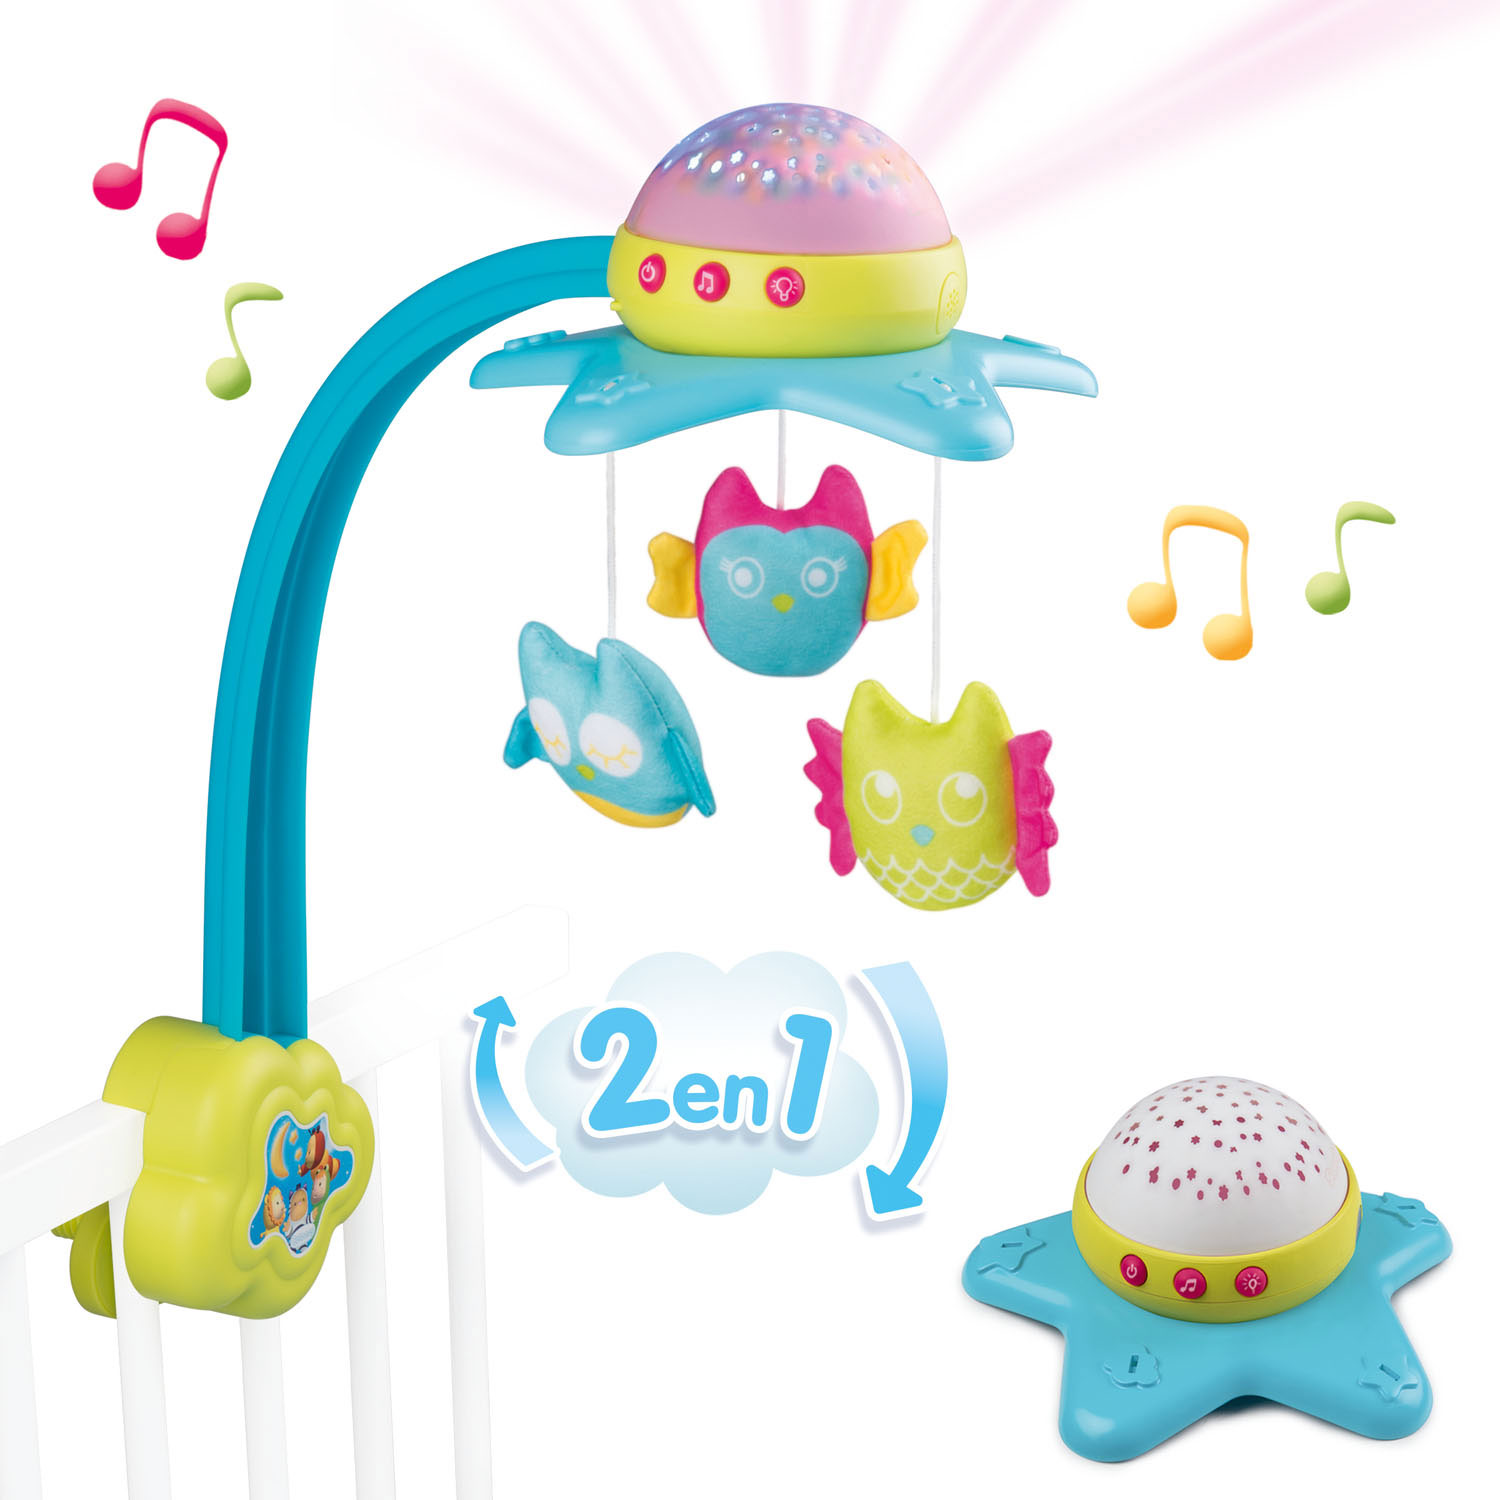 Smoby Cotoons Baby Mobile Star